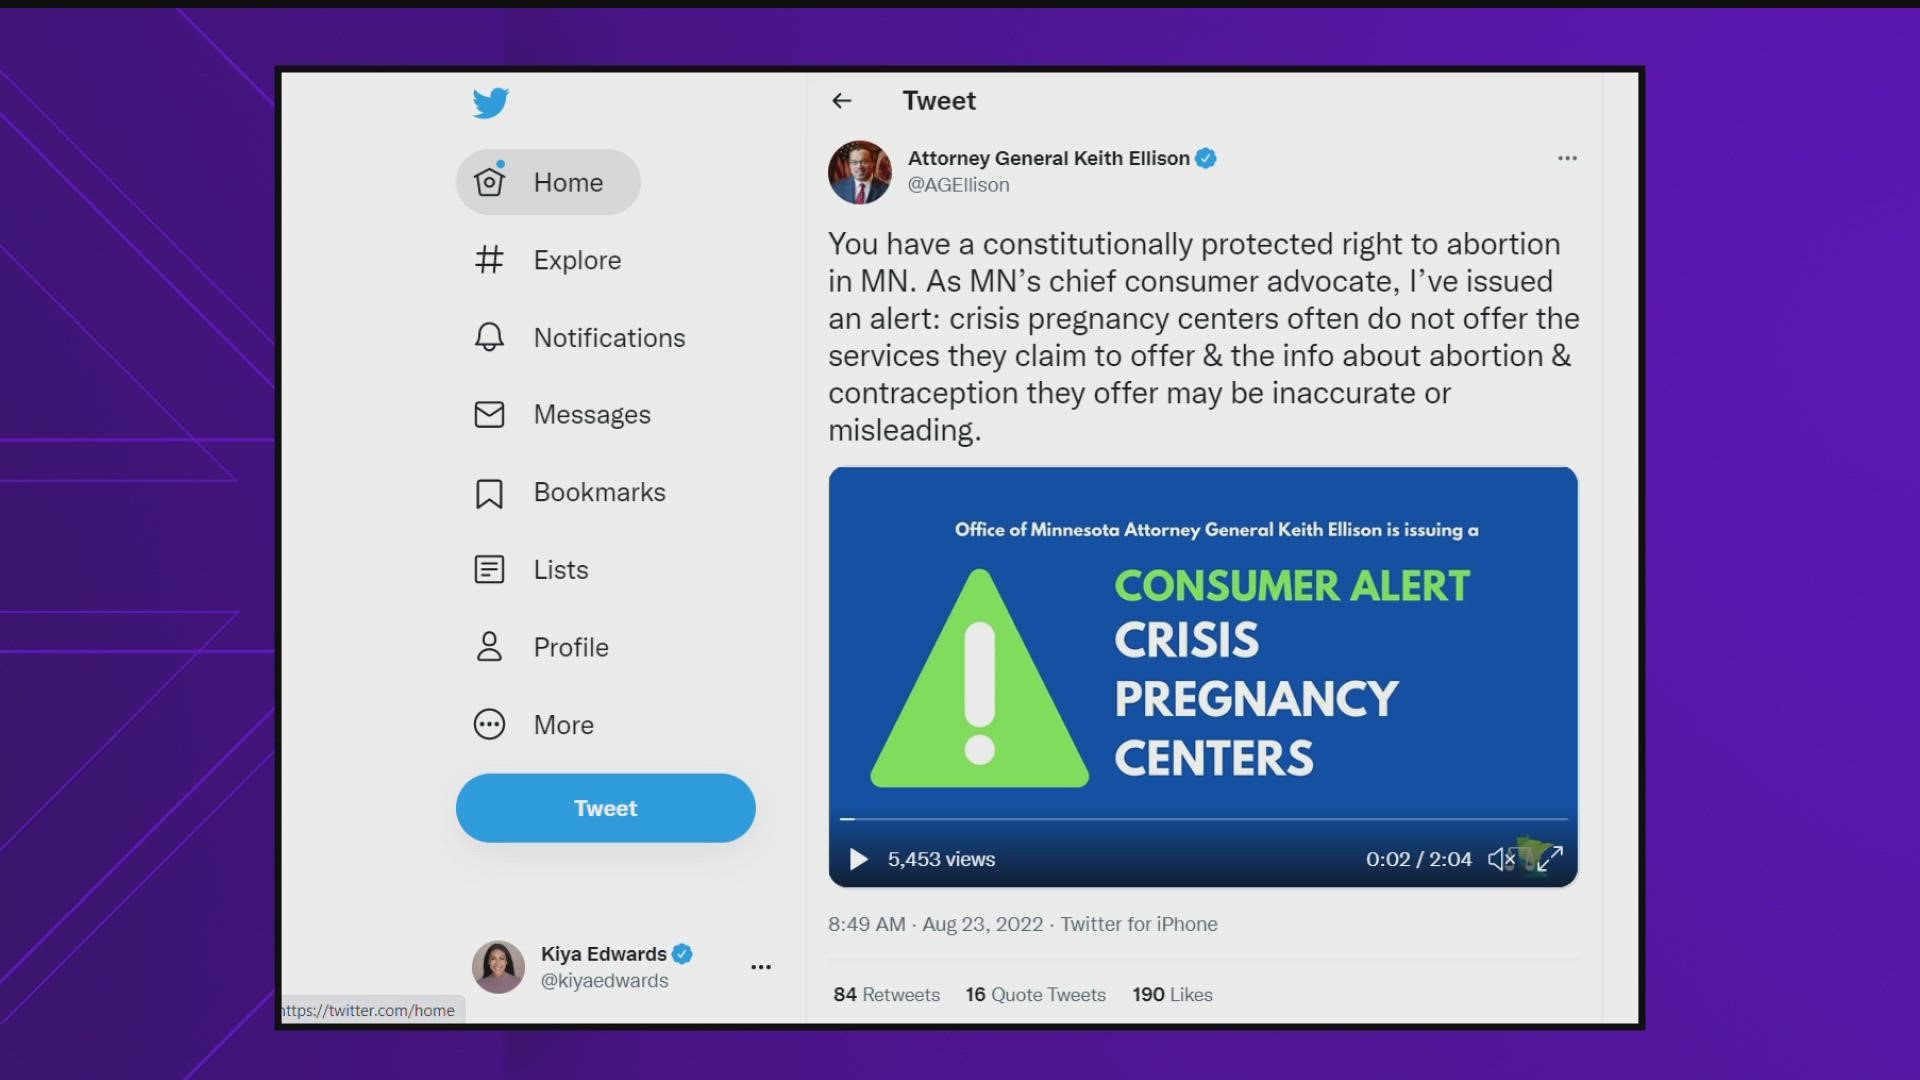 One crisis pregnancy center told KARE 11 that Keith Ellison's comments in his consumer alert was "very generalized and rather unfair."